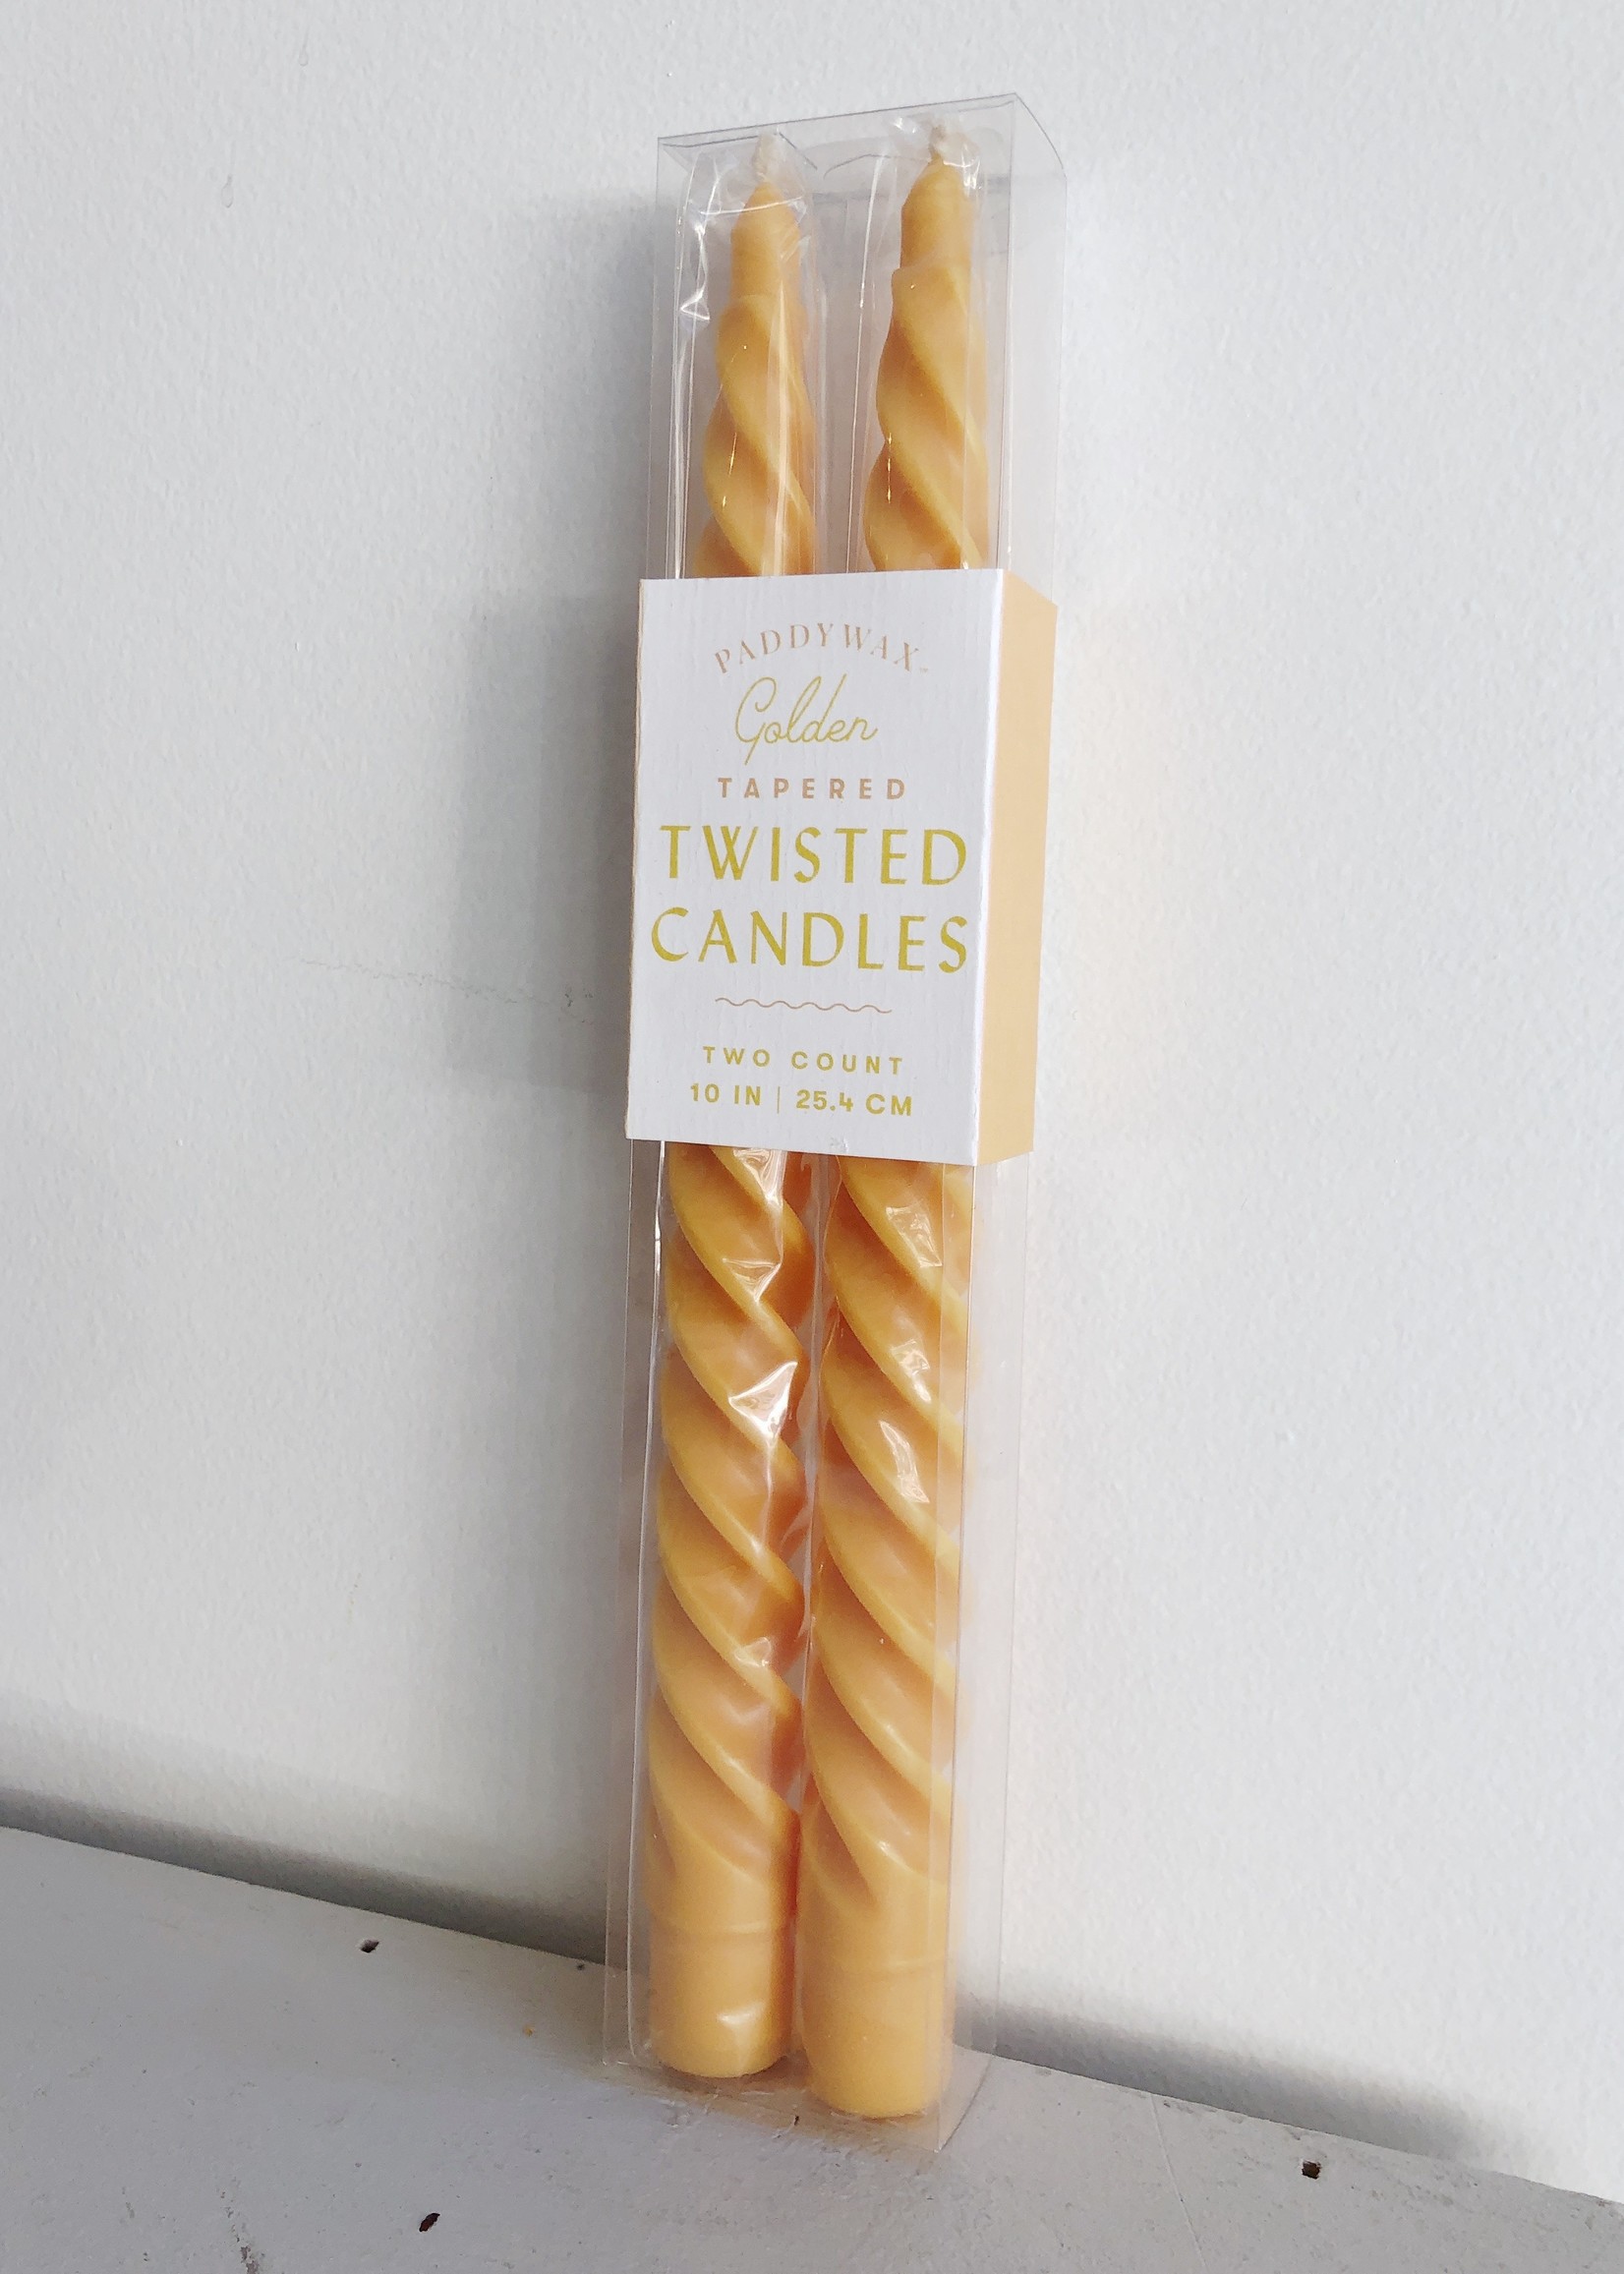 Paddywax Paire de bougies "Twisted" par Paddywax